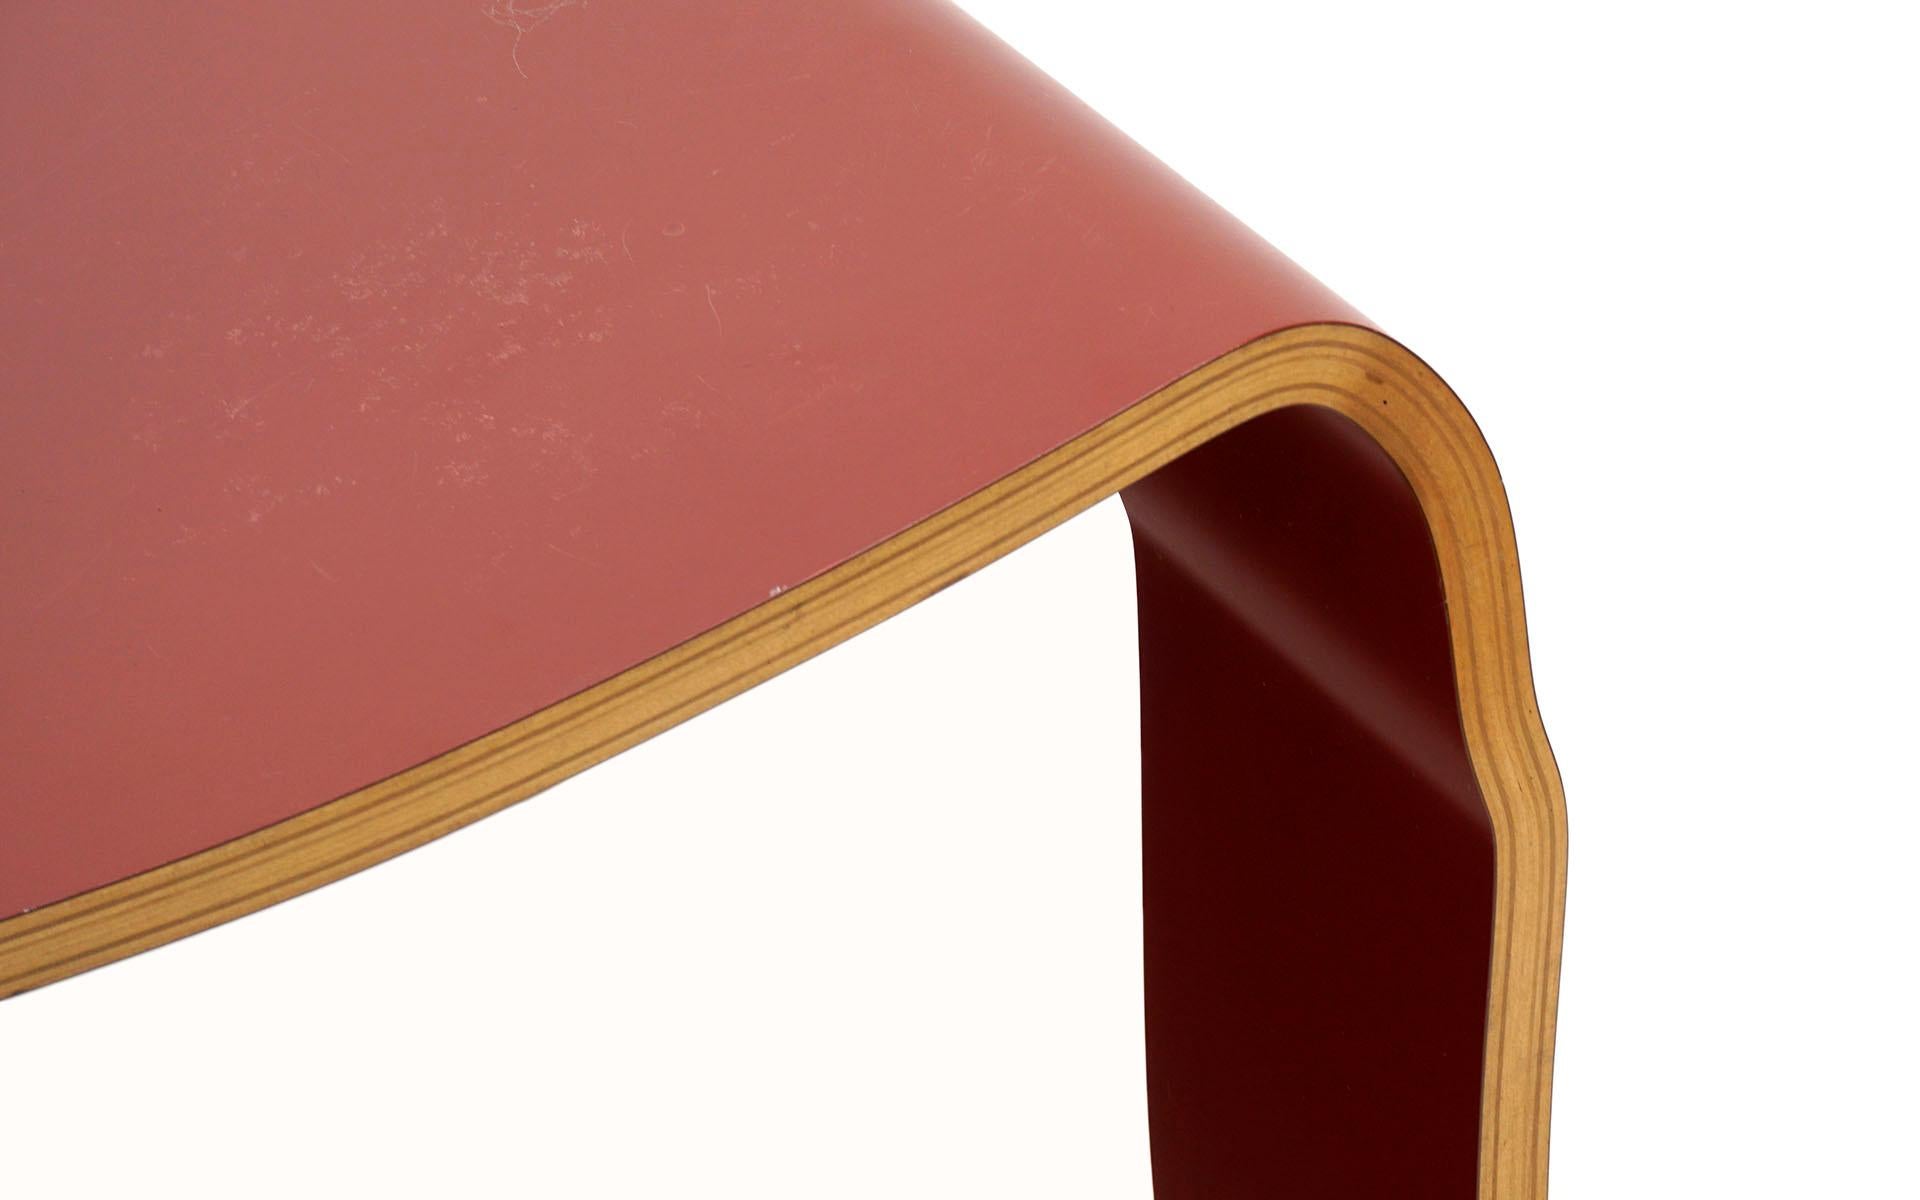 Late 20th Century Queen Anne Chair in Red by Robert Venturi for Knoll